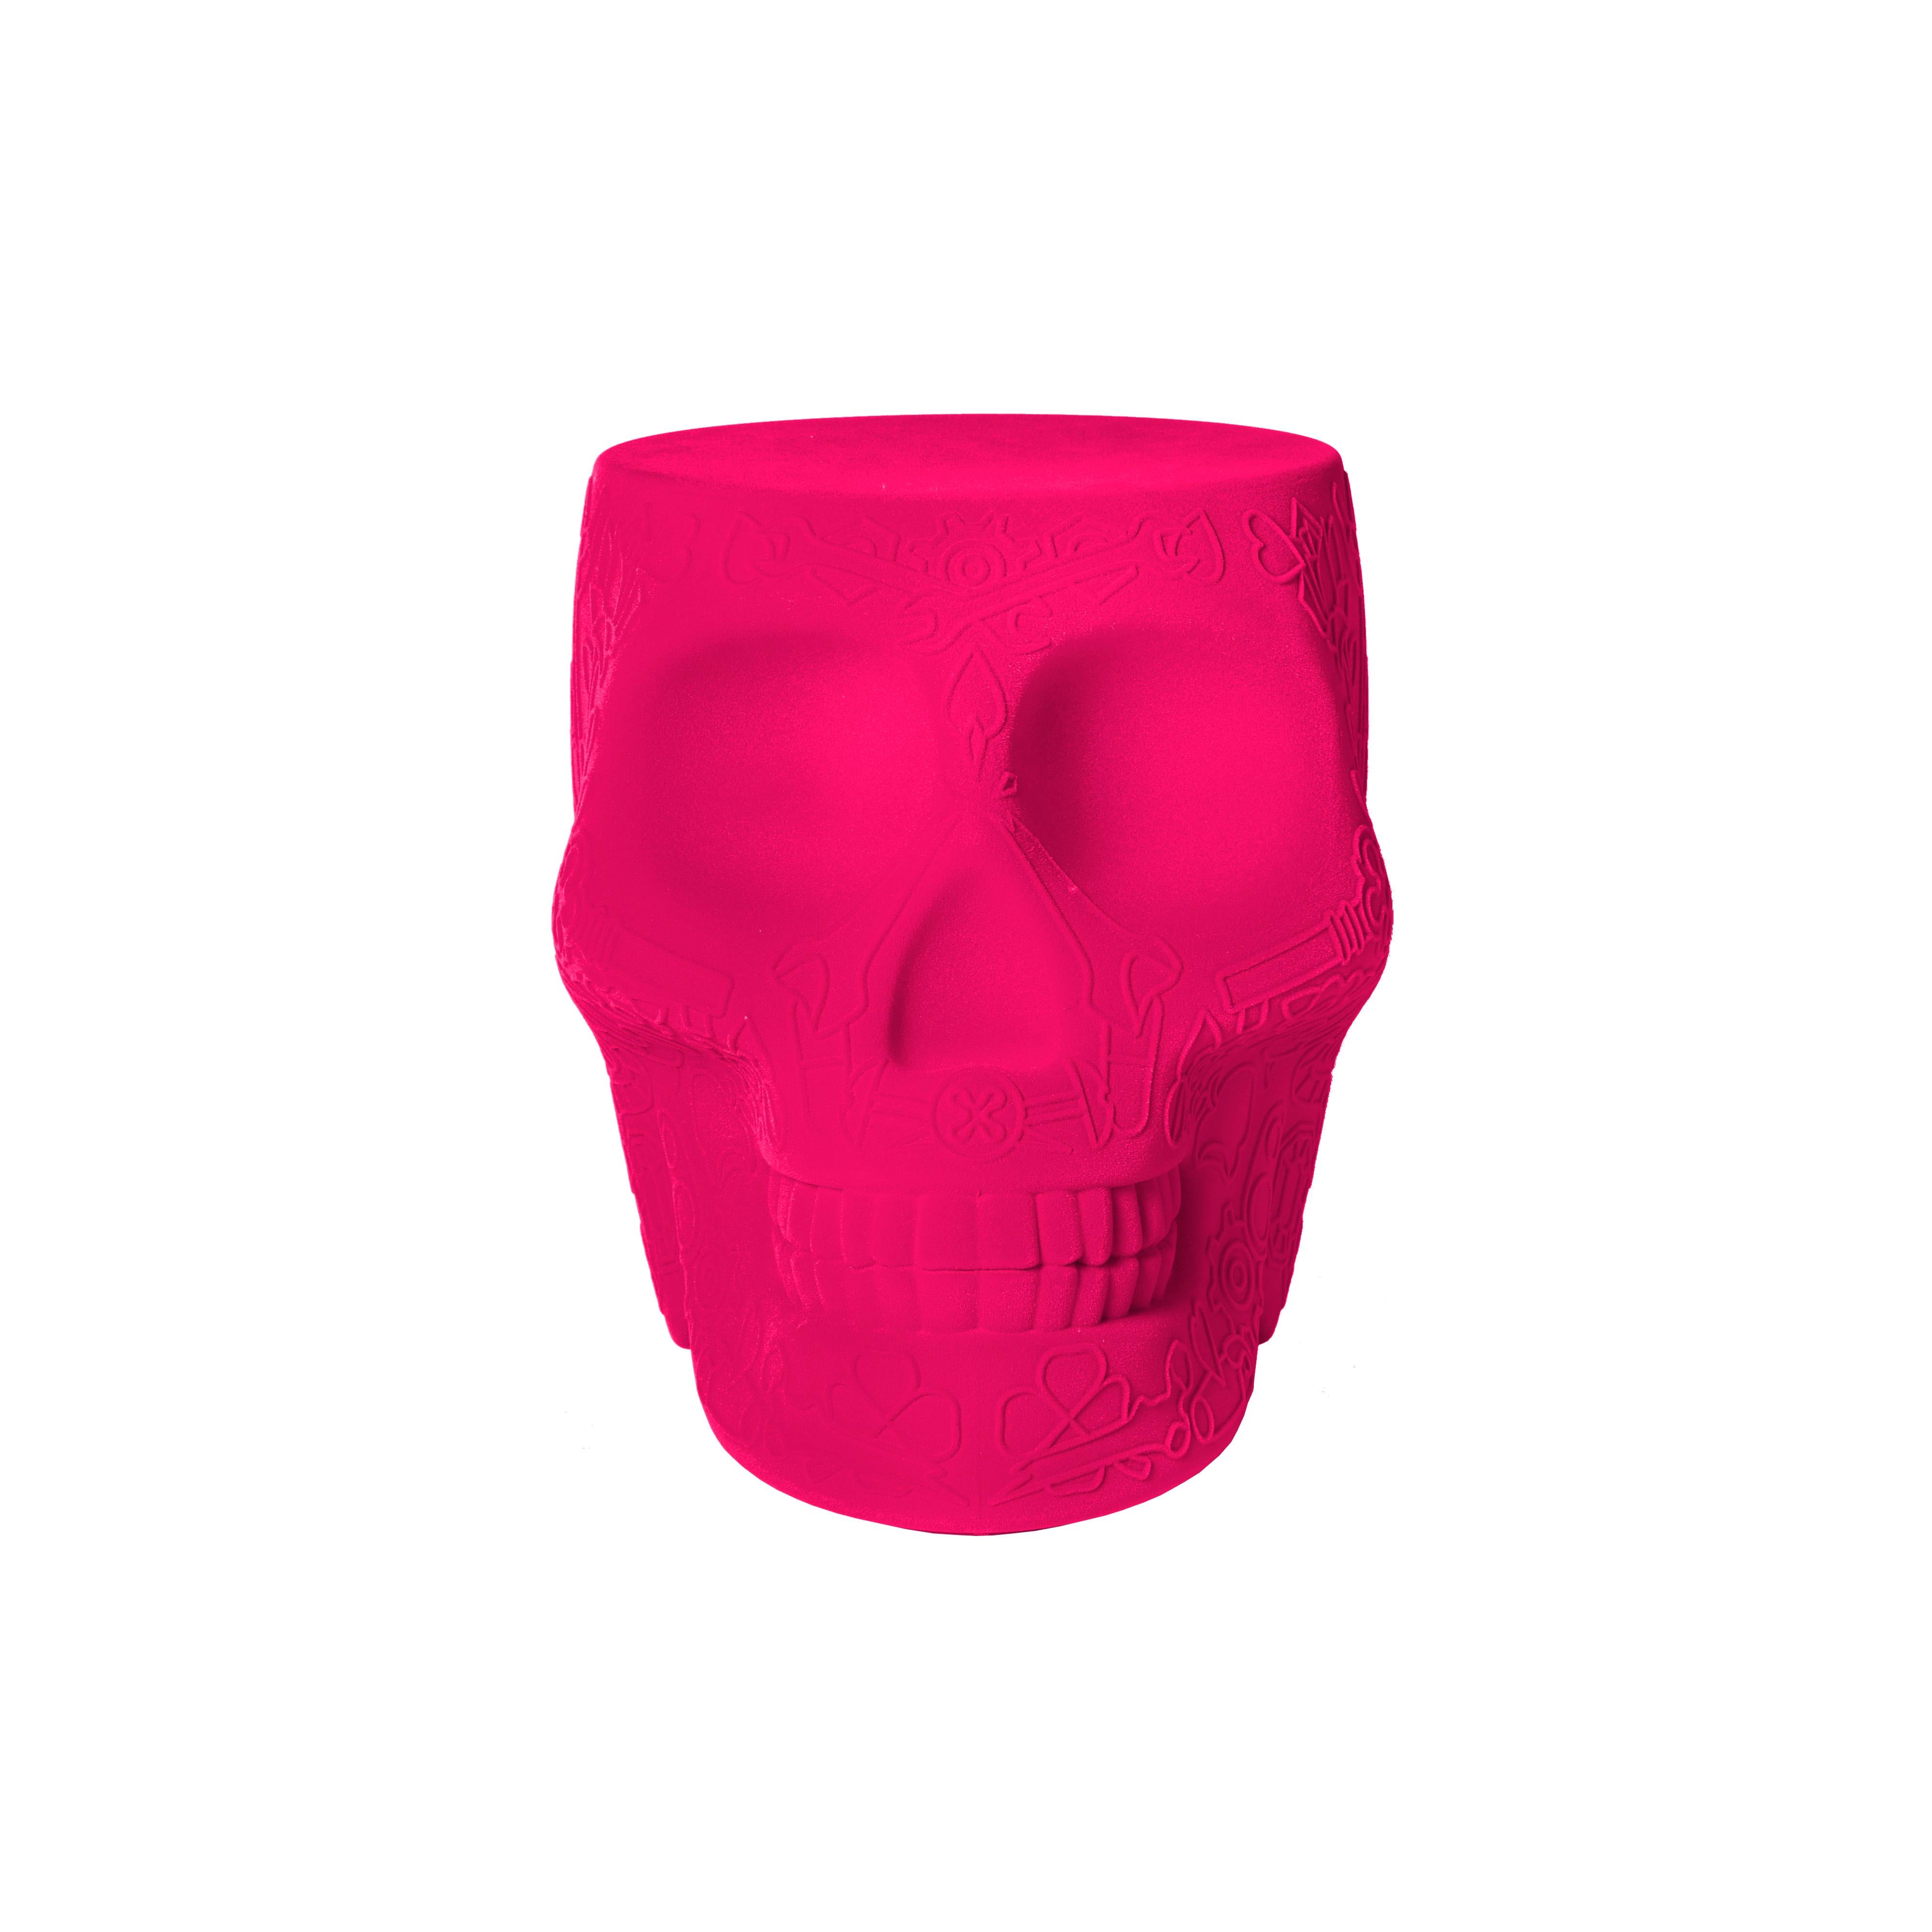 Pink (Fuxia) Modern Velvet Mexican Calavera Skull Stool or Side Table By Studio Job